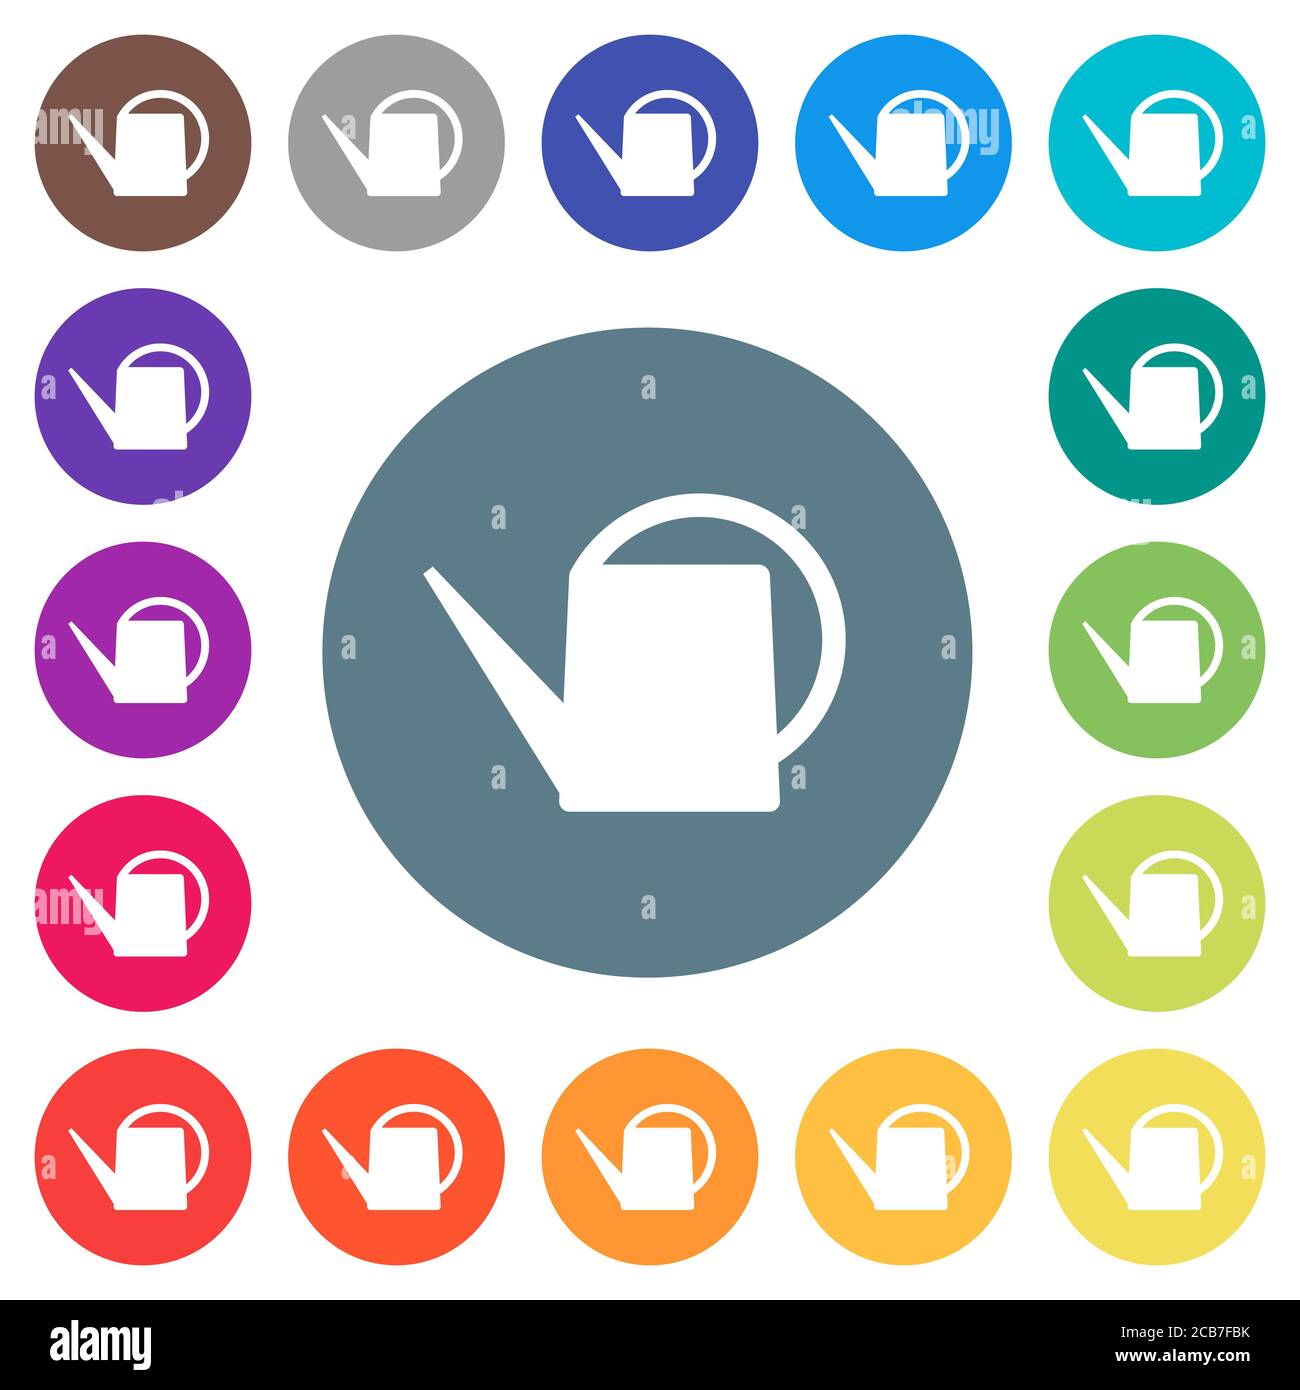 Watering can flat white icons on round color backgrounds. 17 background color variations are included. Stock Vector